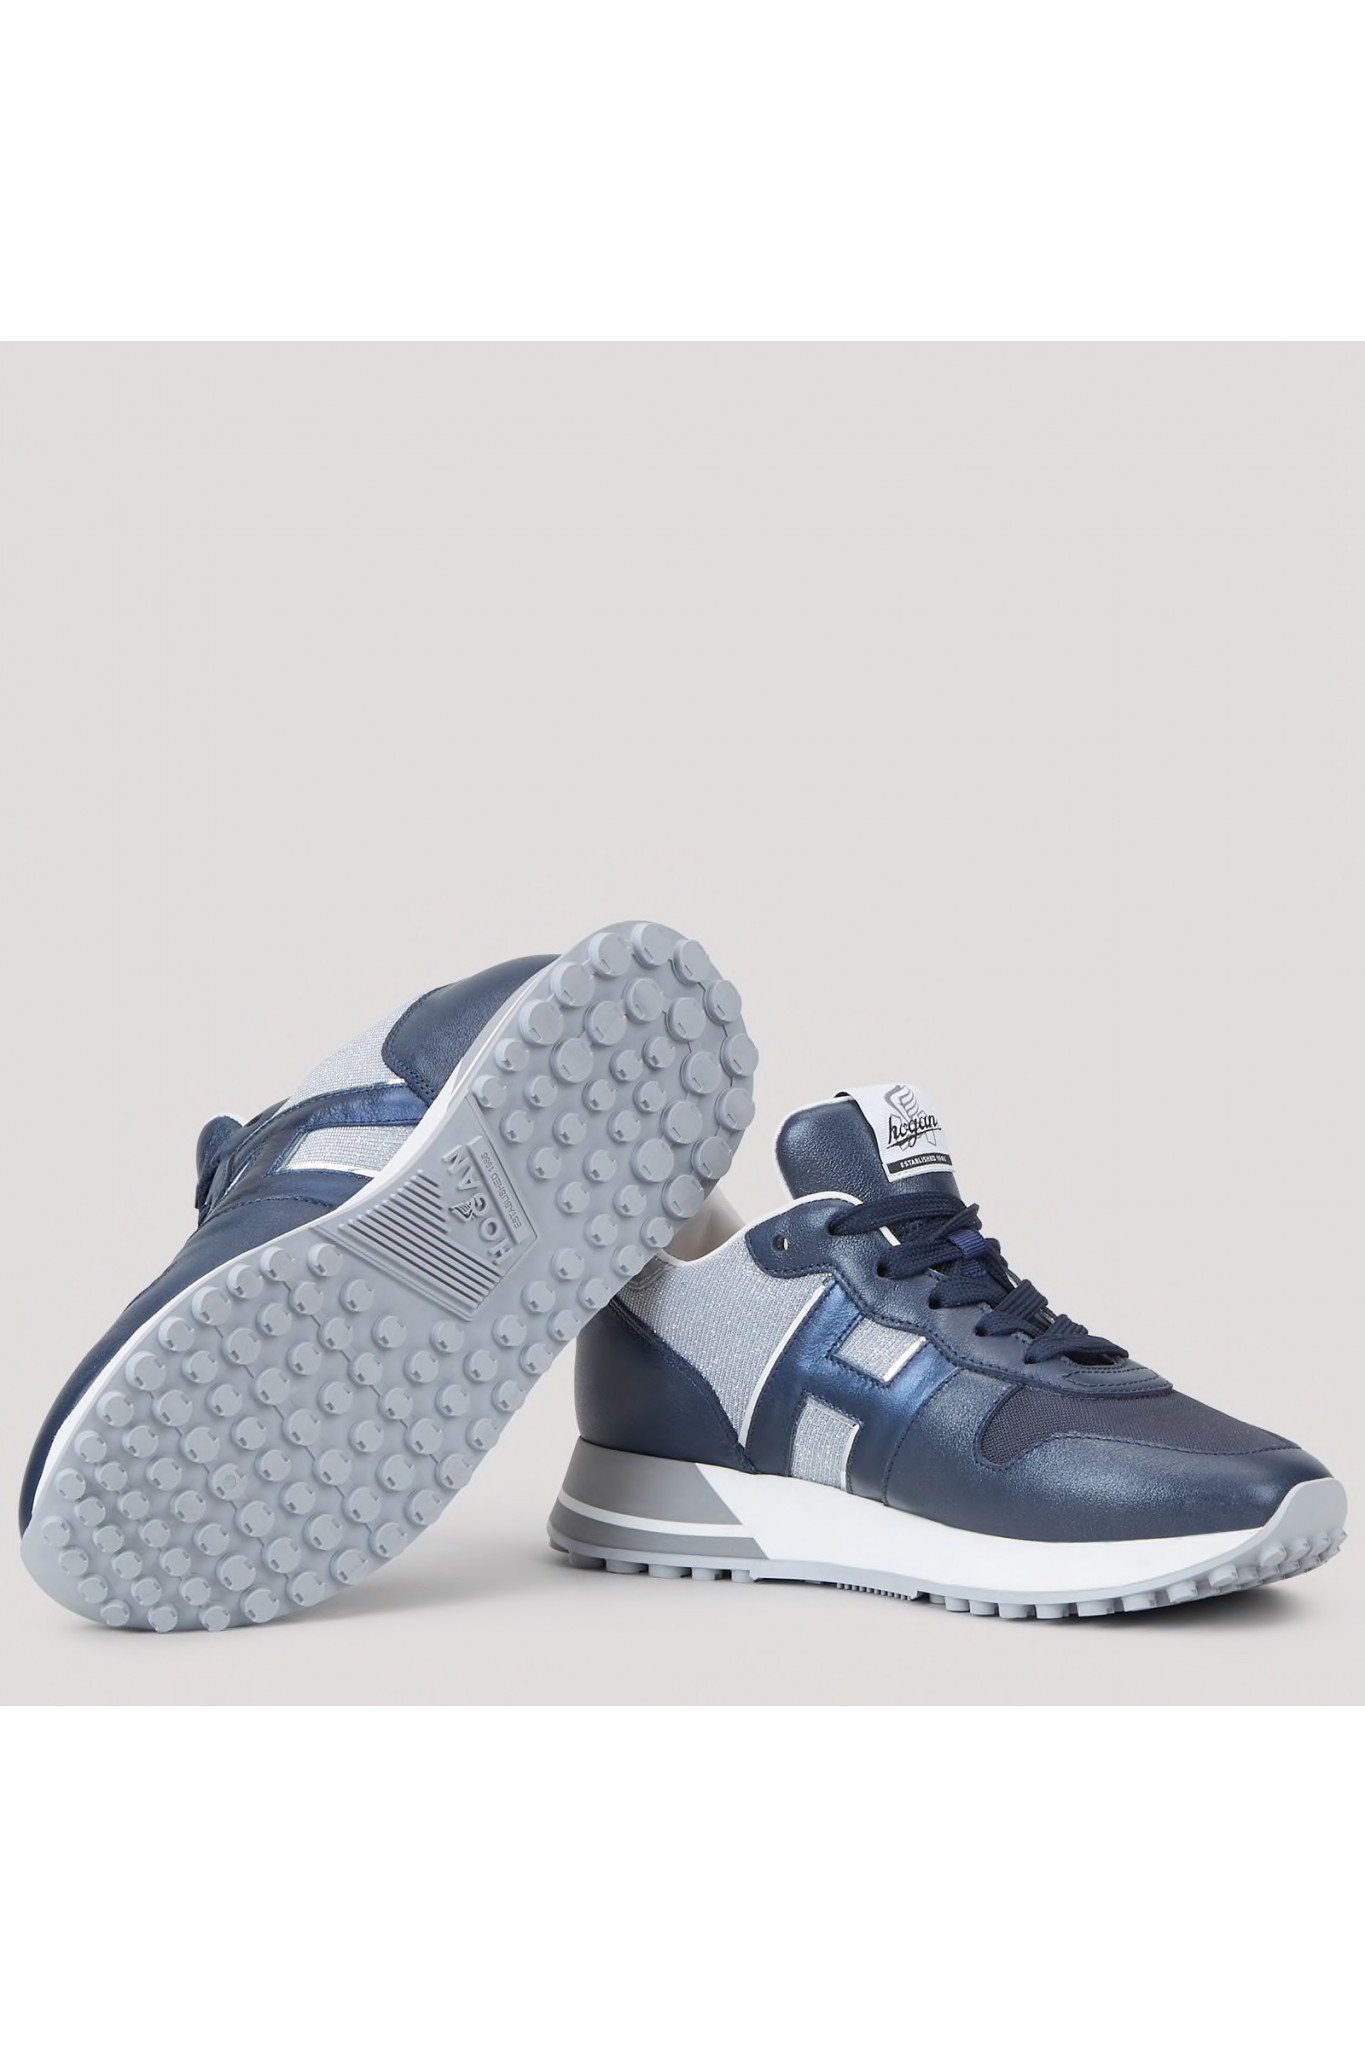 shop online Hogan H383 sneakers in navy leather and silver shiny canvas.